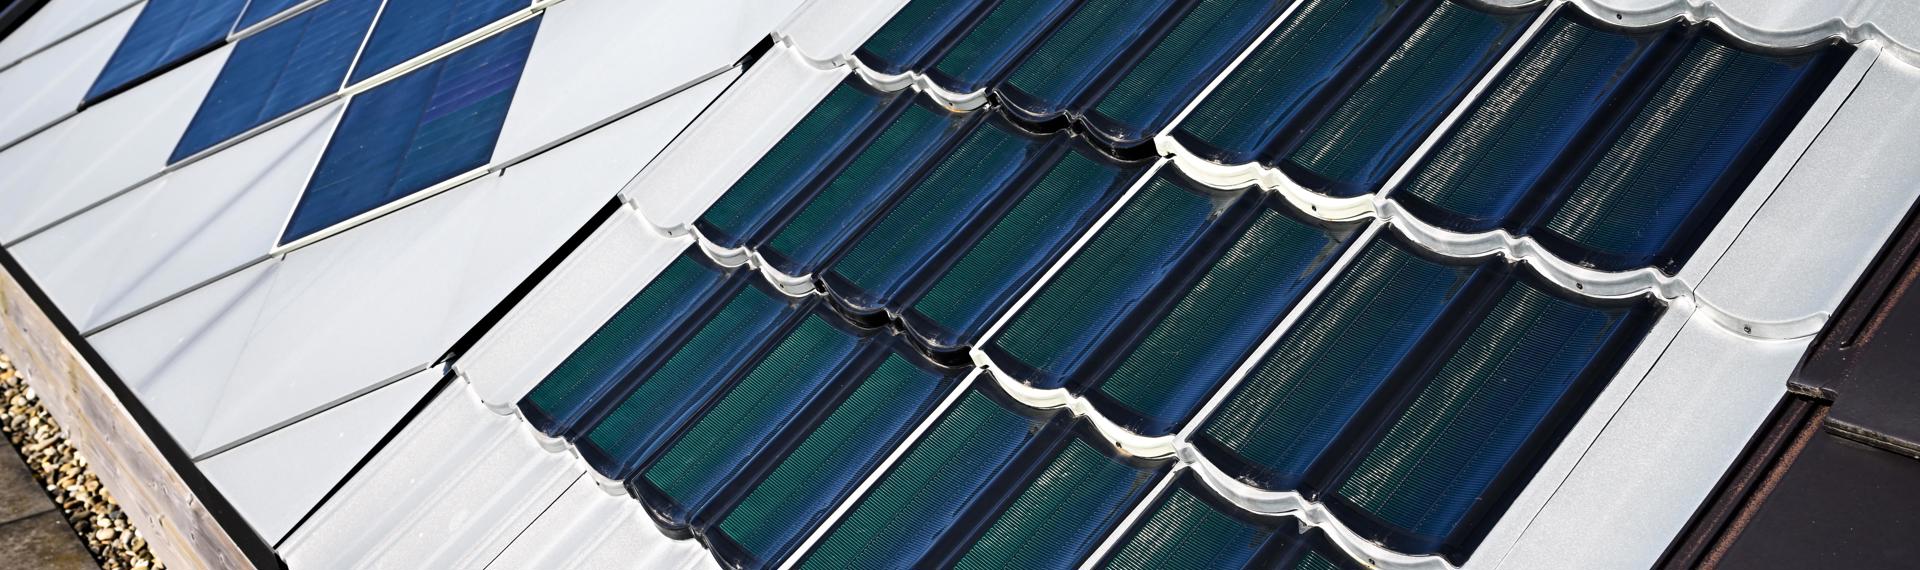 Different applications of flexible solar panels